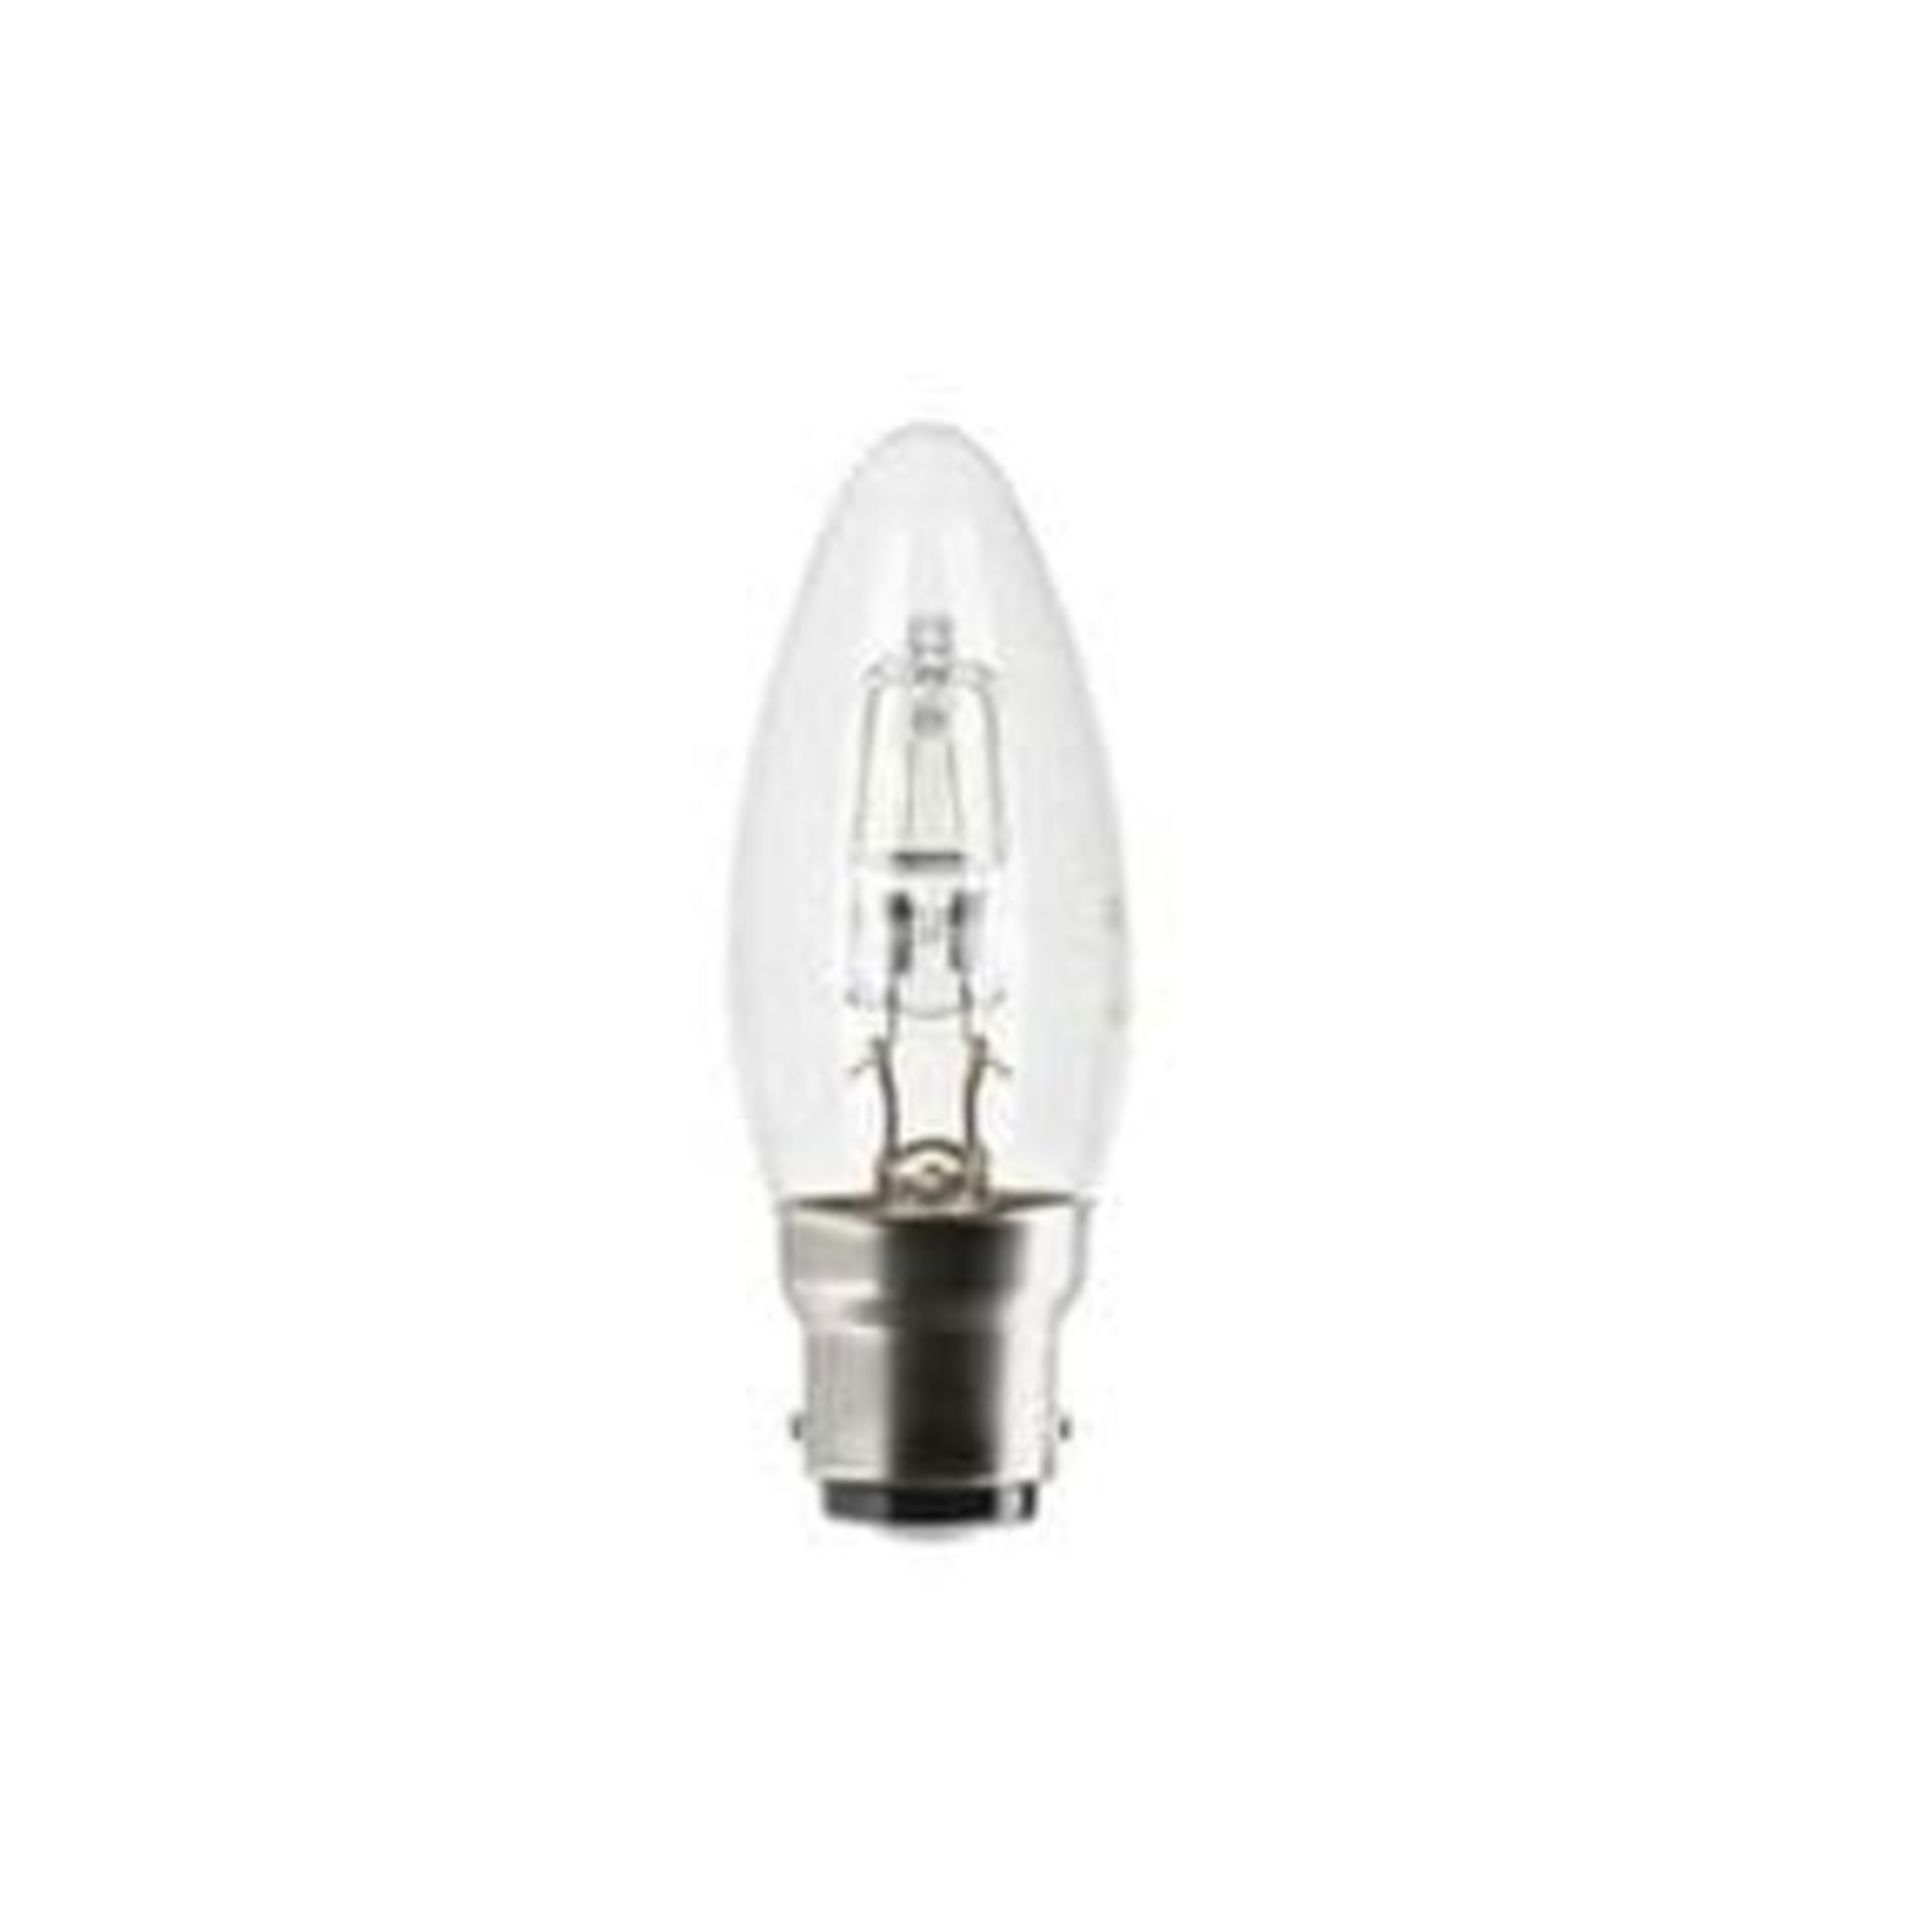 Quantity of 360 light bulbs - 4 different items